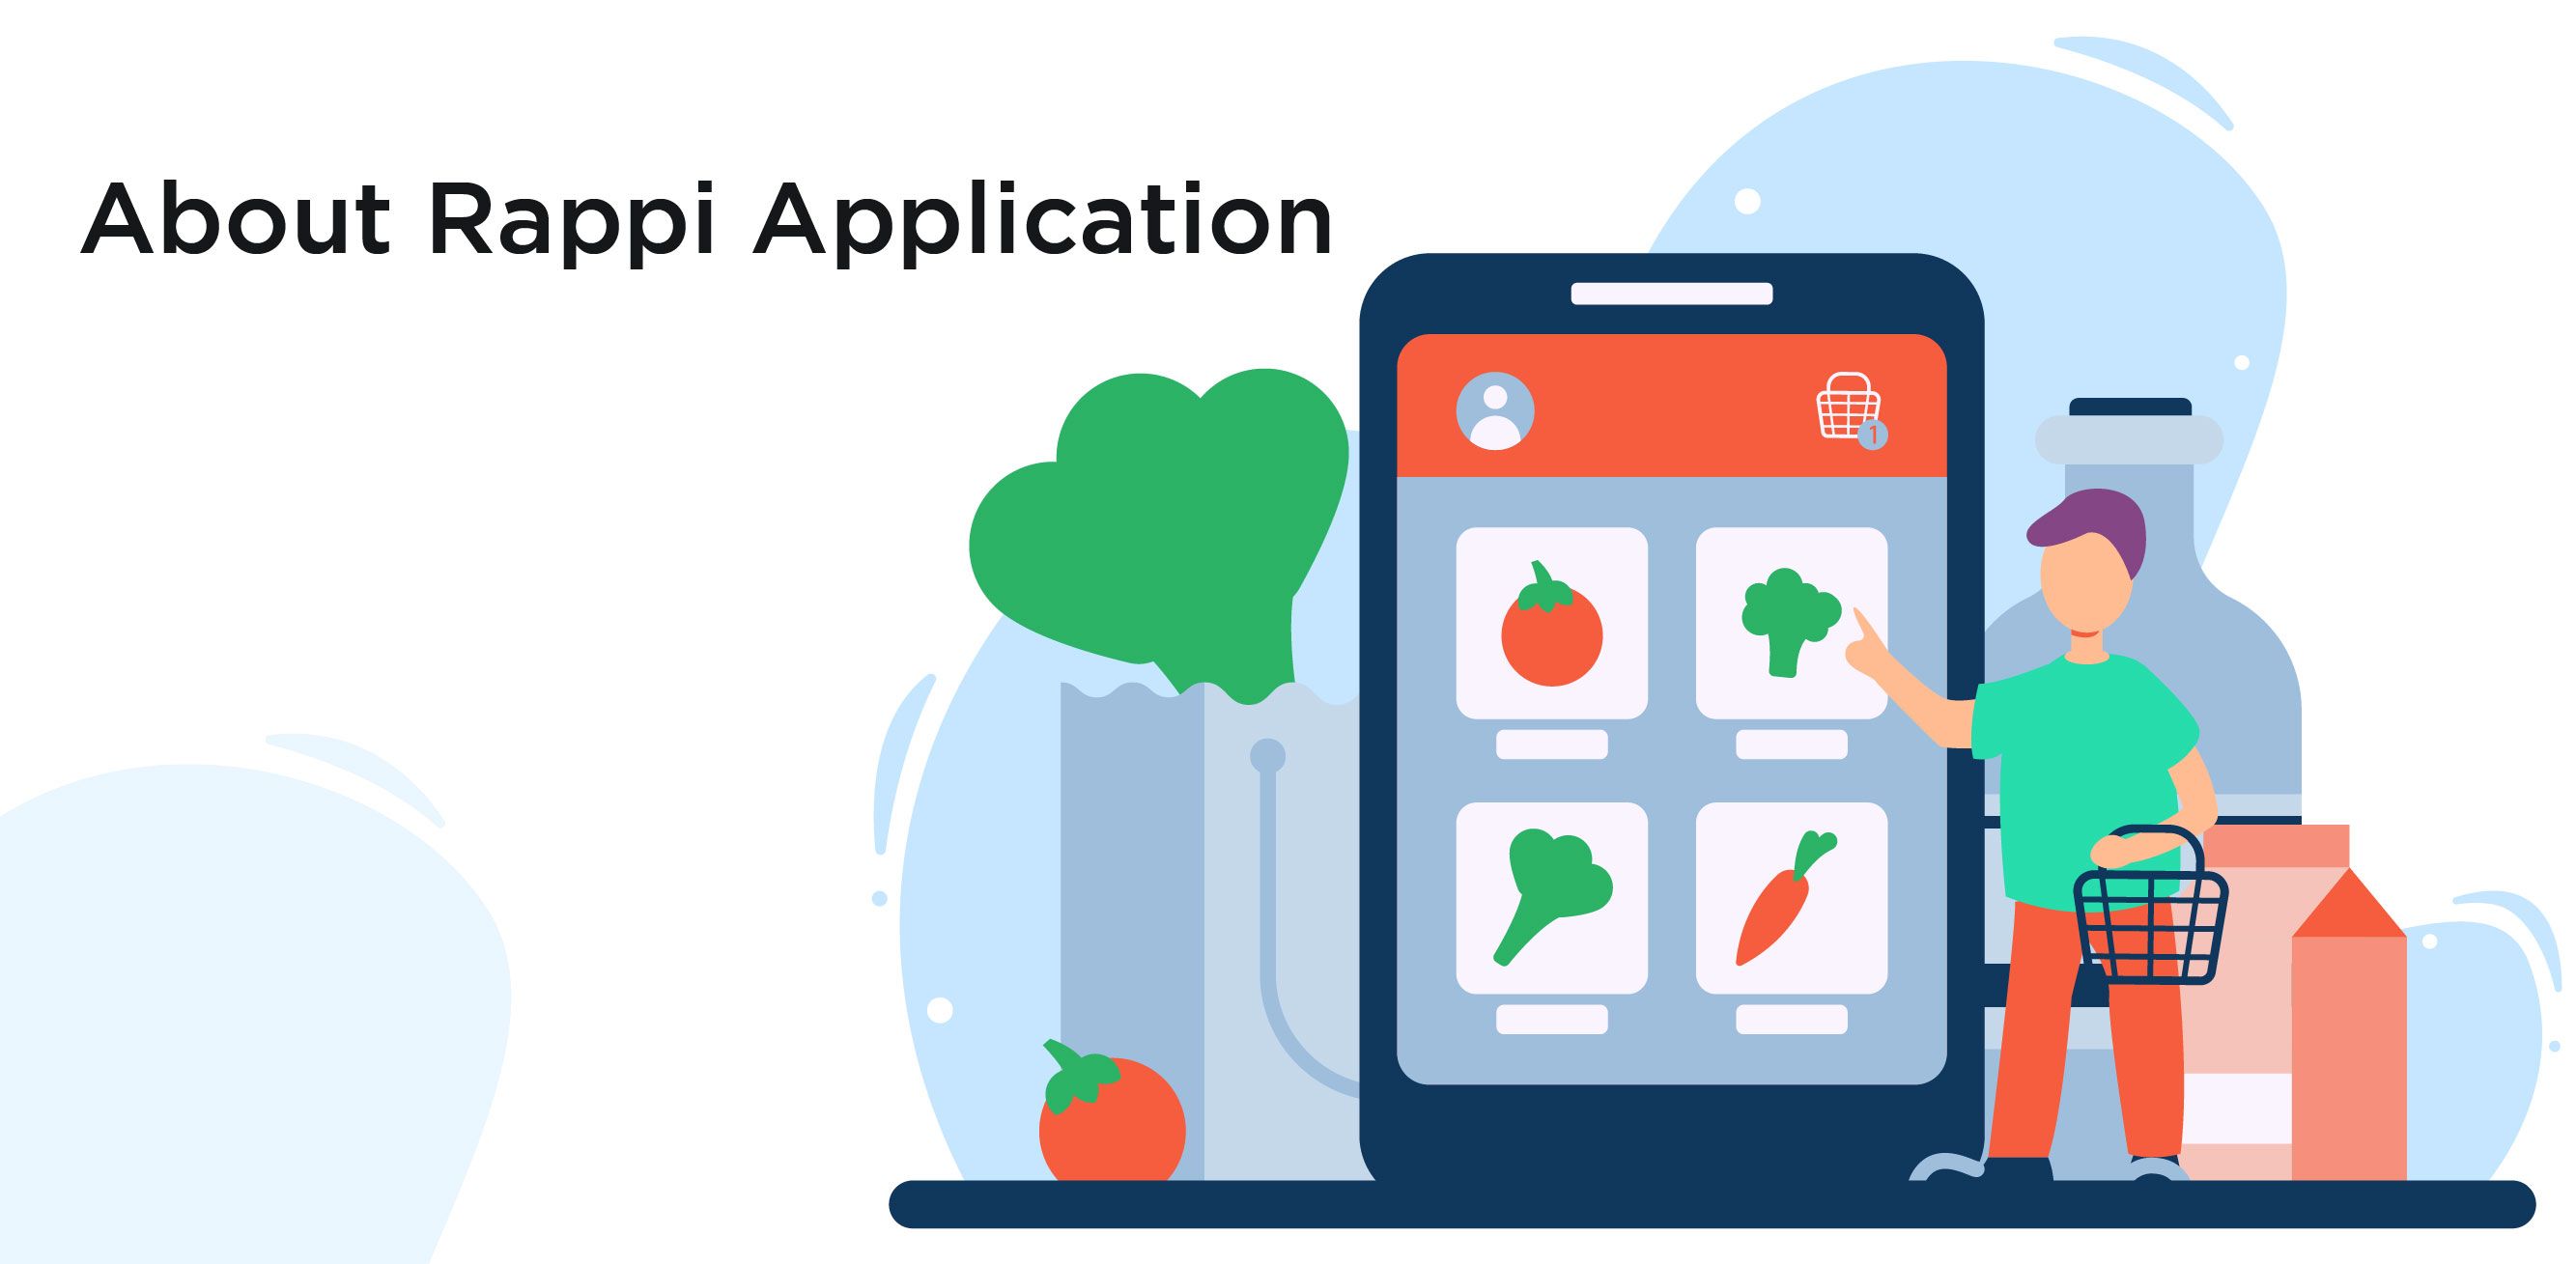 ABOUT RAPPI APPLICATION